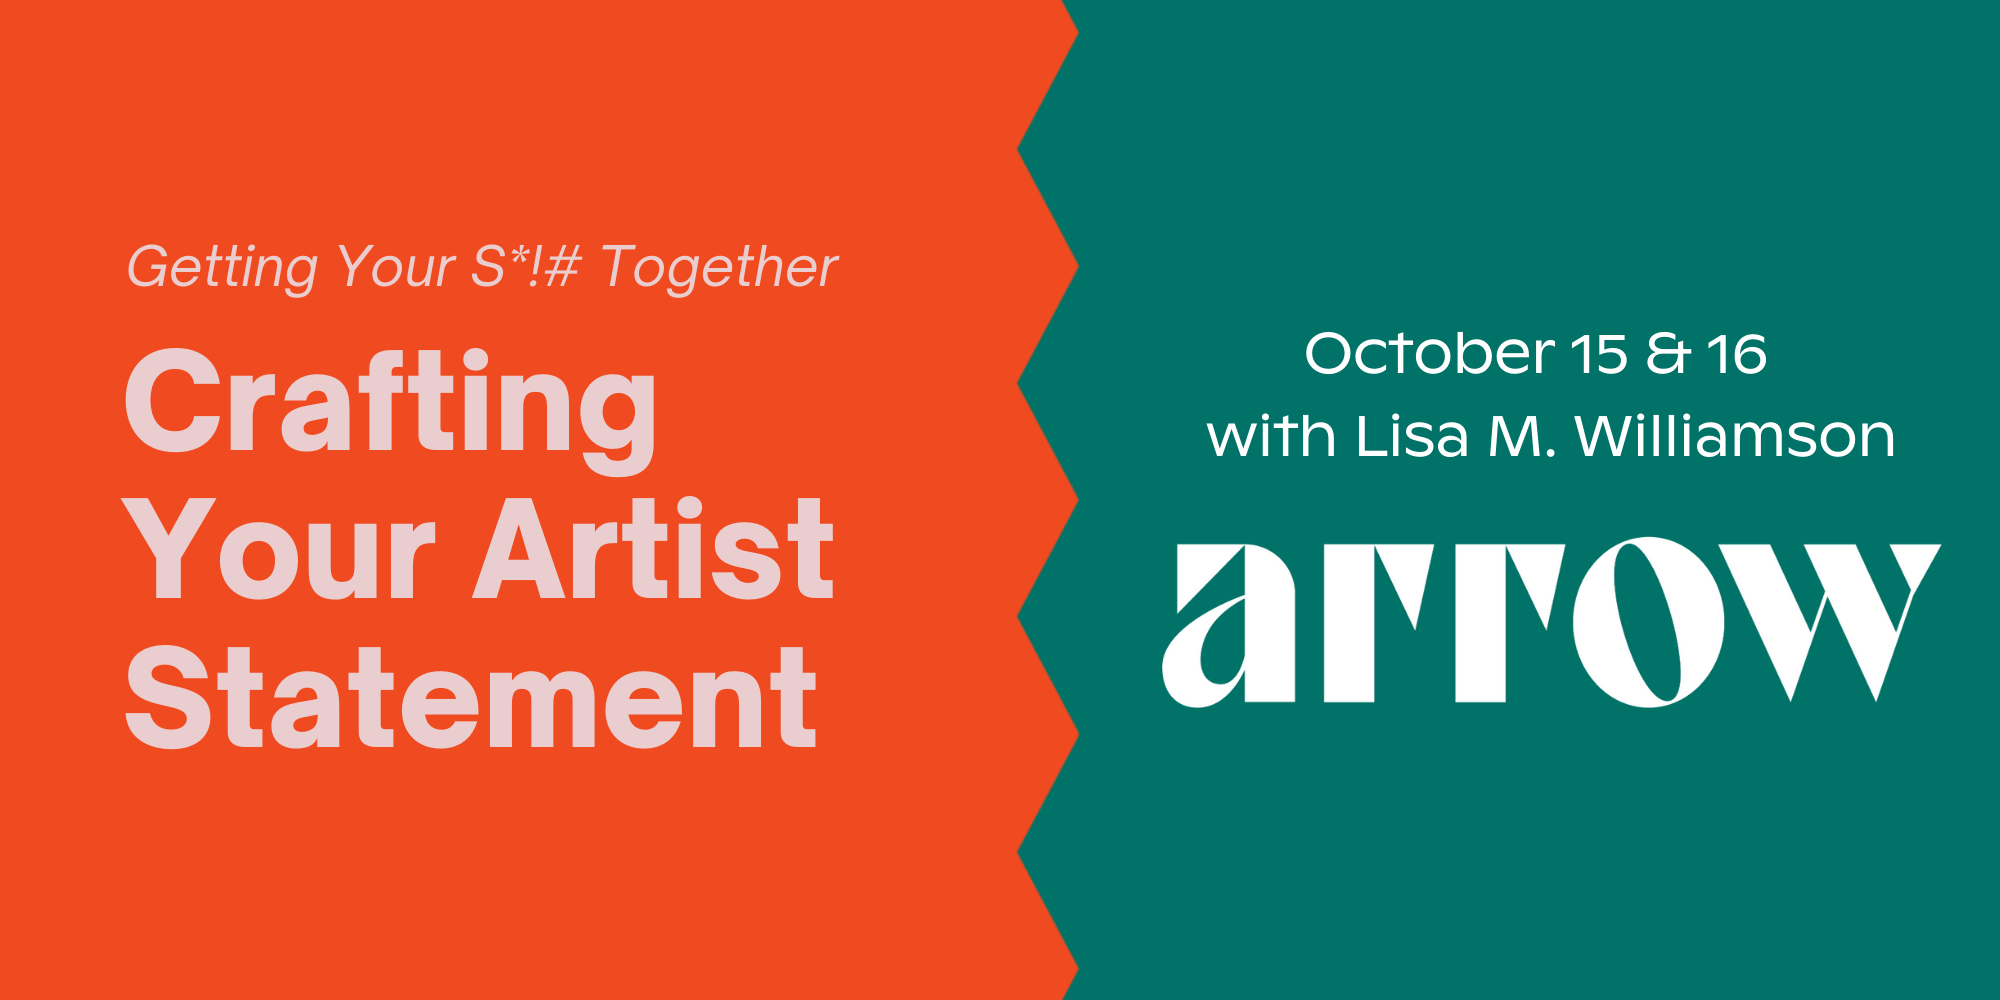 Get Your S*!# Together: Crafting Your Artist Statement promotional image